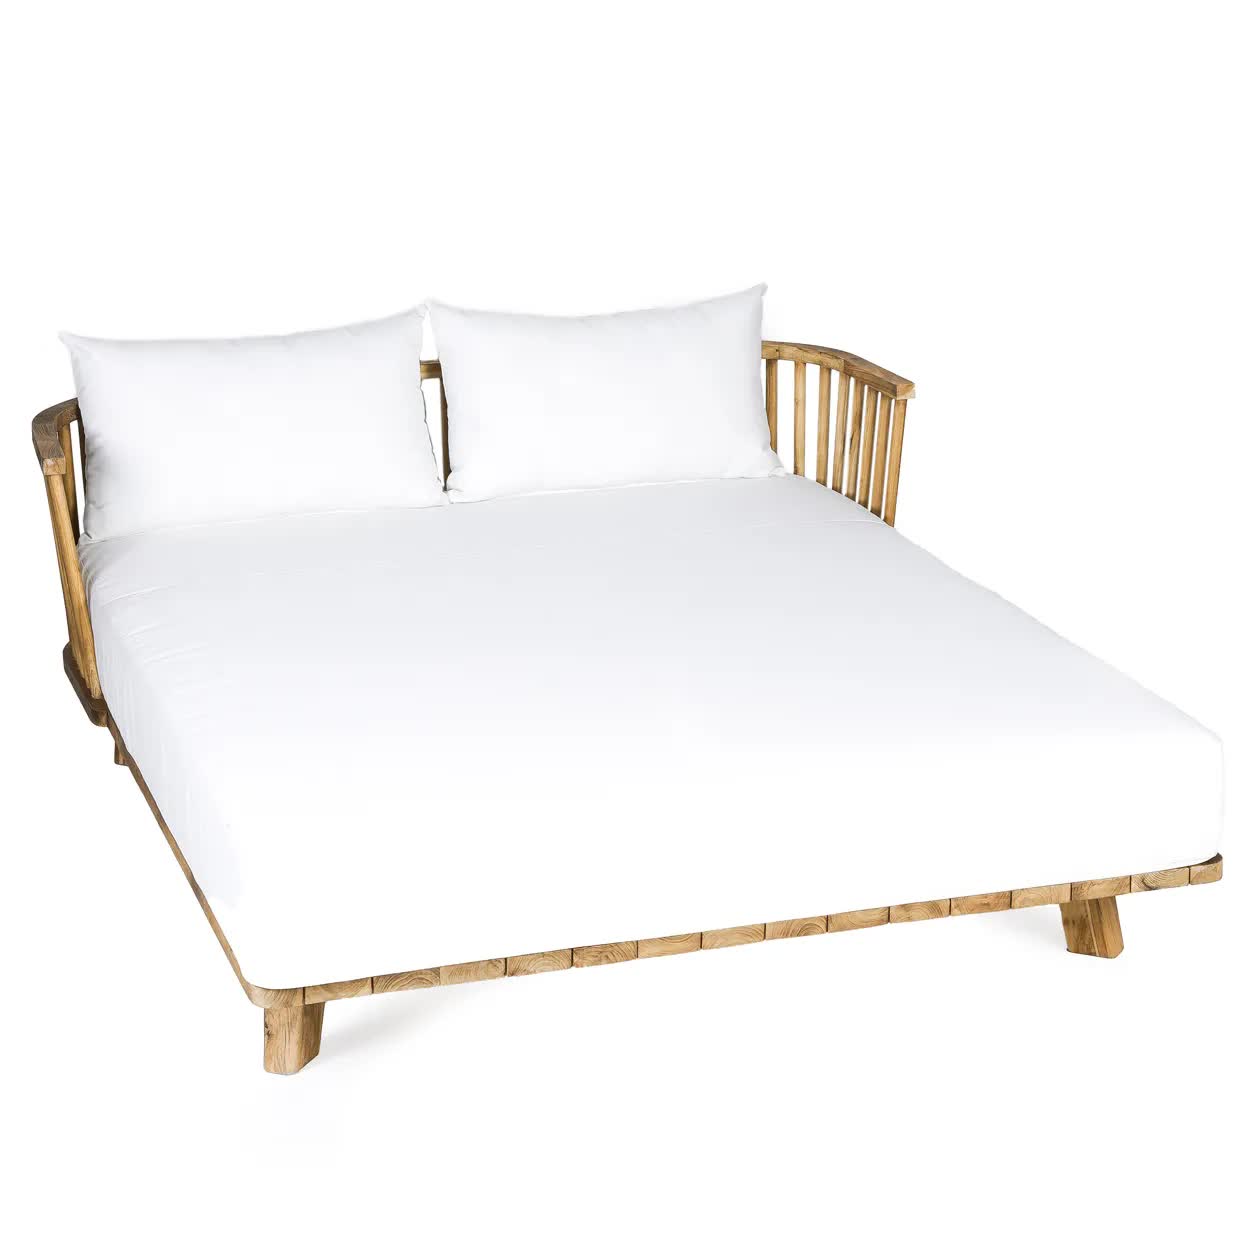 THE MALAWI Double Daybed Natural White